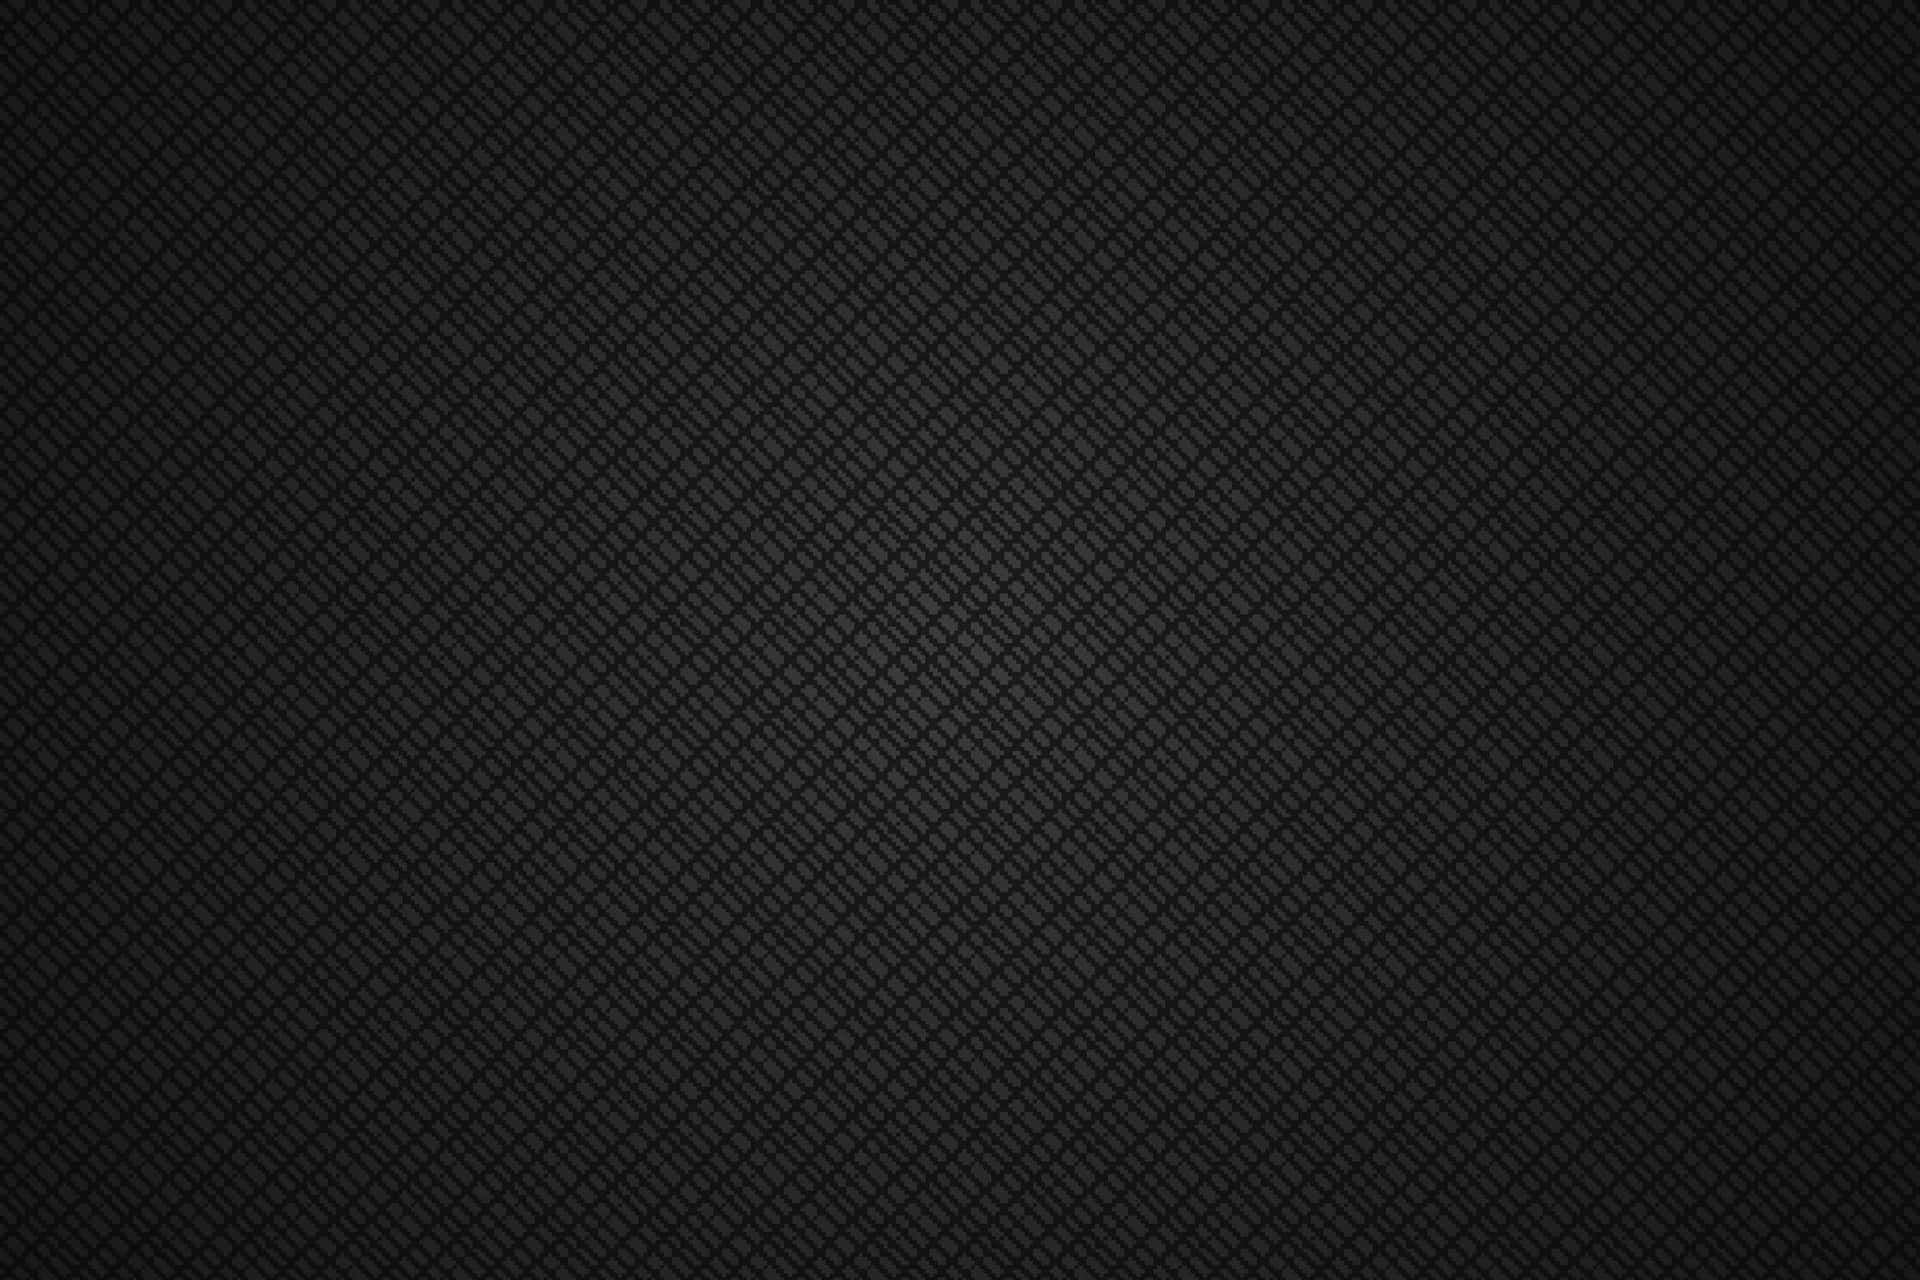 Download Black Texture Pictures Woven Fabric | Wallpapers.com